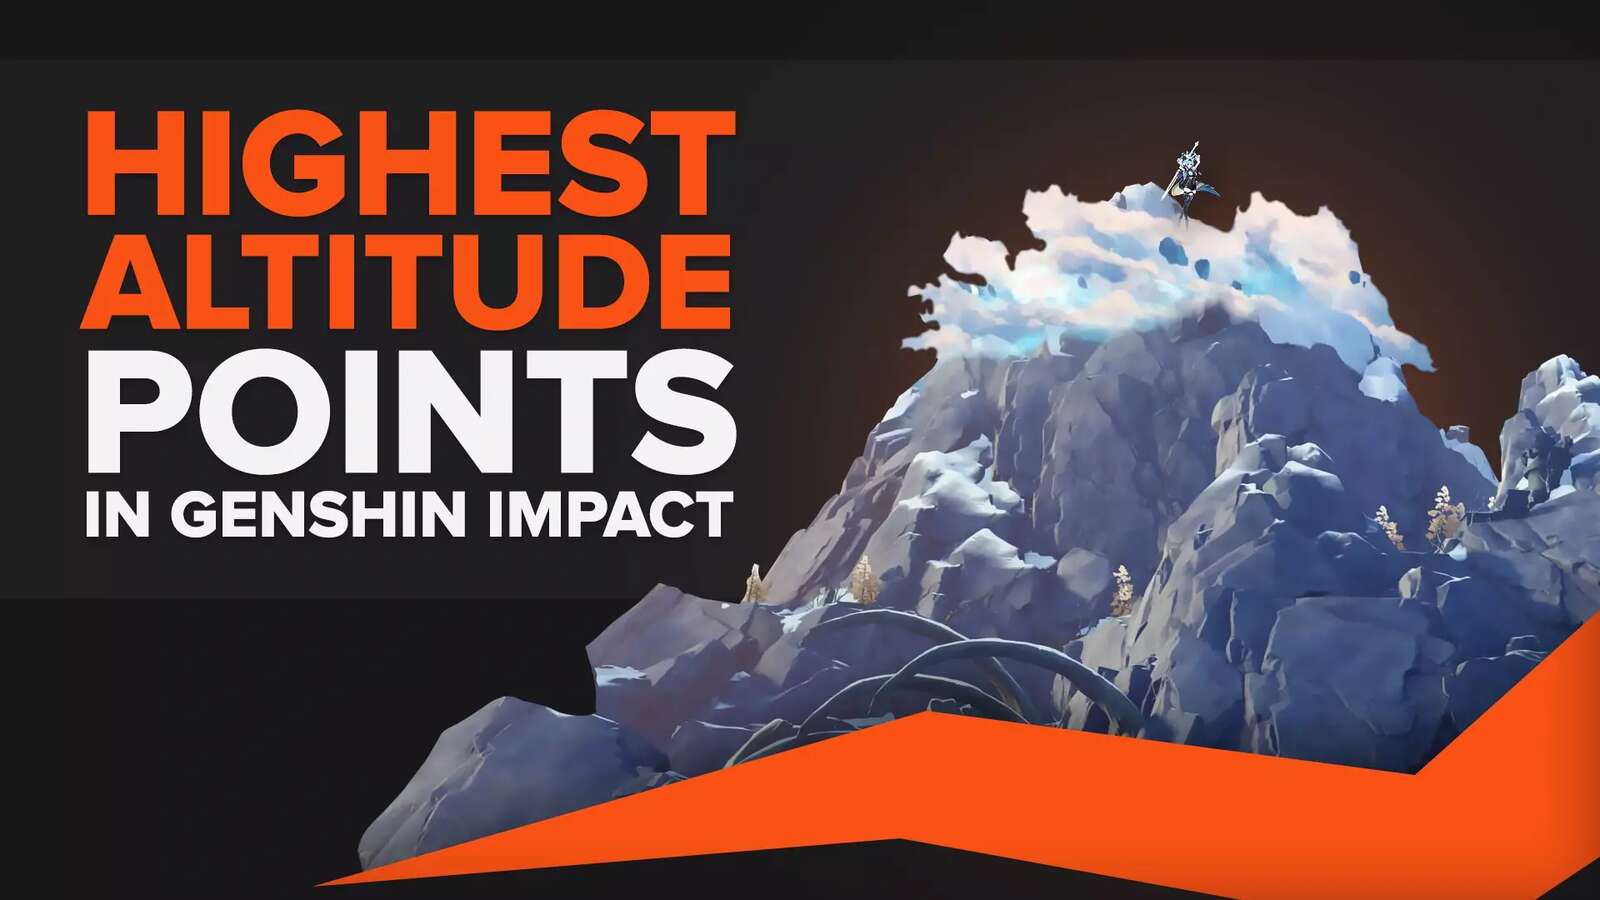 4 Highest Altitude Must-See Points in Genshin Impact